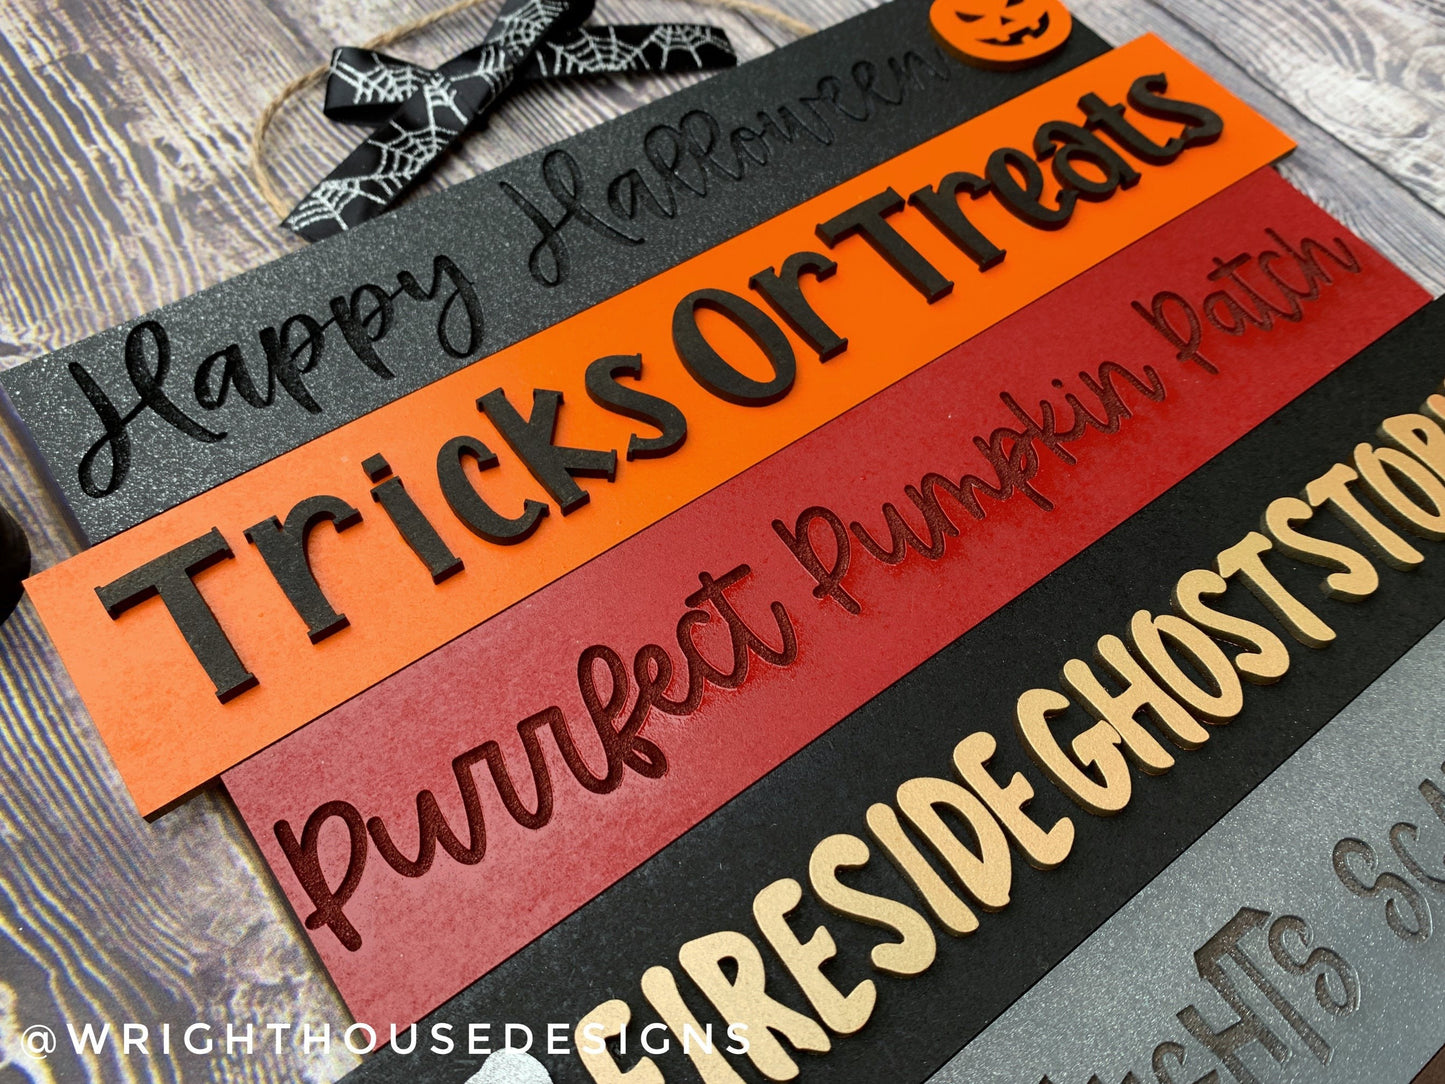 Happy Halloween Trick or Treat Bucket List Stacked Sign - Seasonal Wall Decor and DIY Kits - Cut File For Glowforge Laser - Digital SVG File